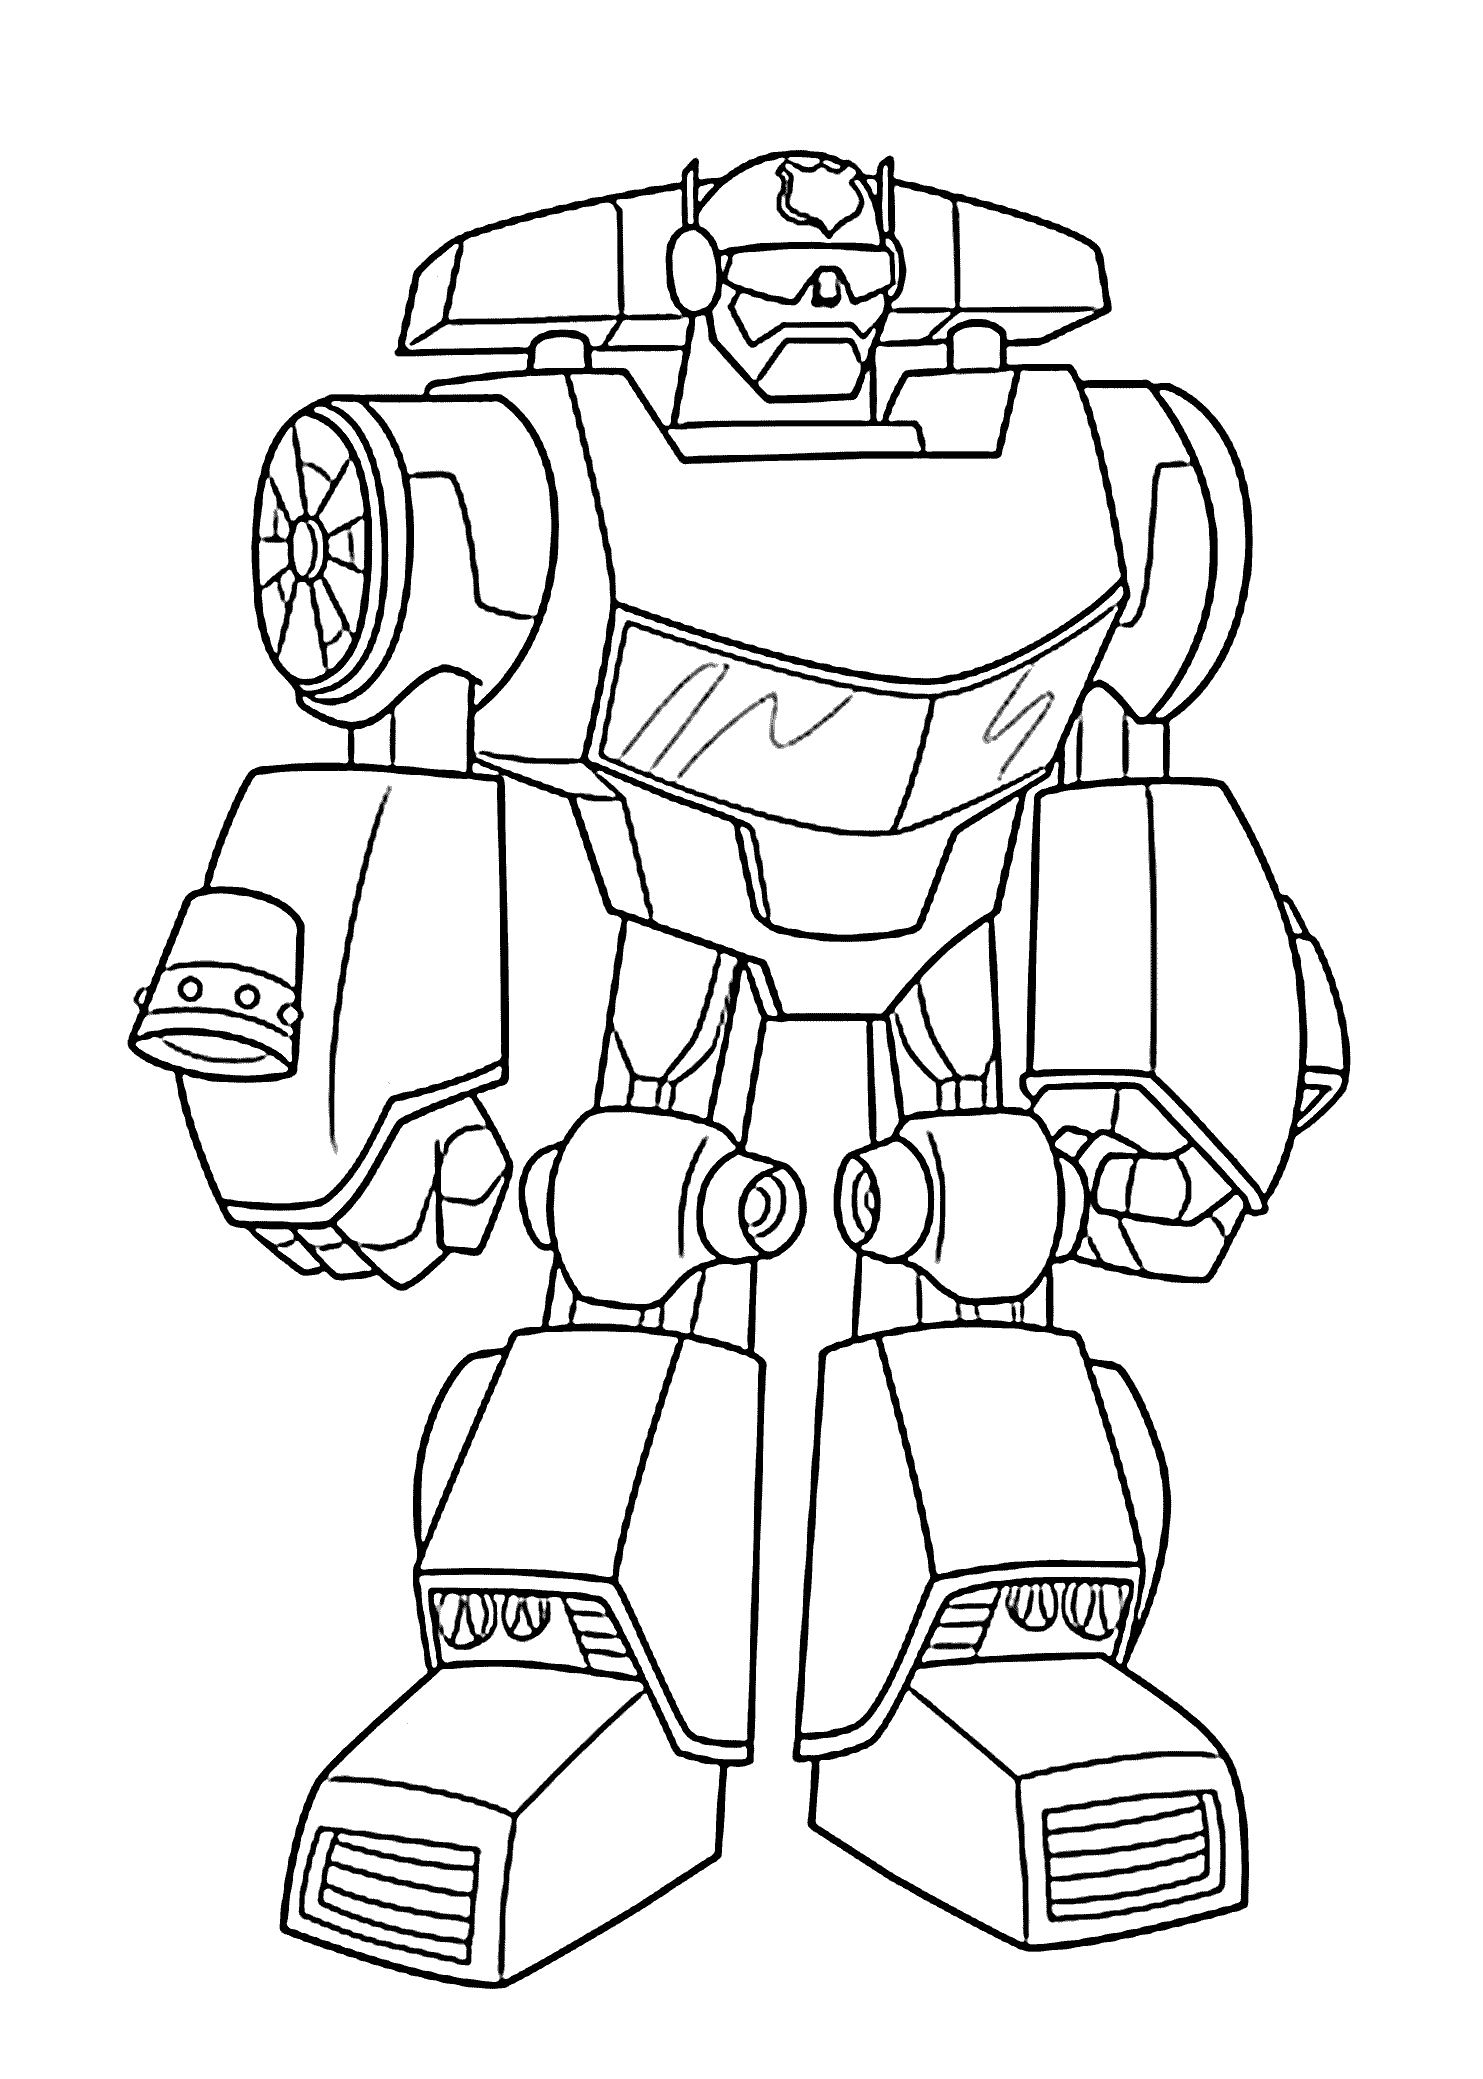 Chase bot coloring pages for kids, printable free - Rescue bots |  Transformers coloring pages, Rescue bots birthday, Transformers rescue bots  birthday